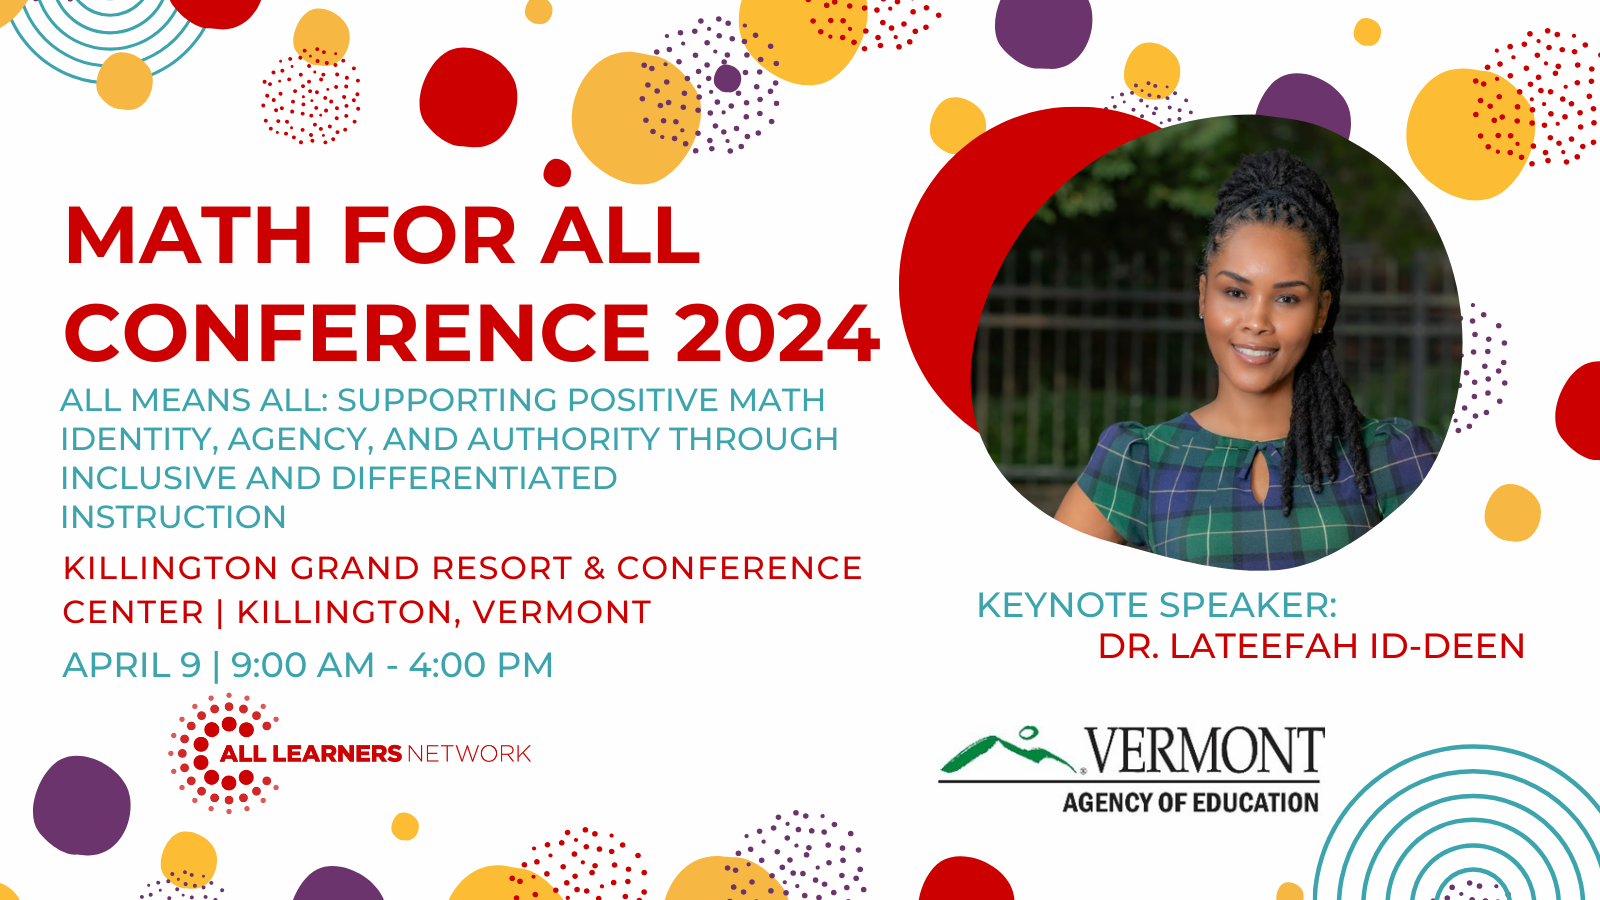 Math for ALL Conference 2024